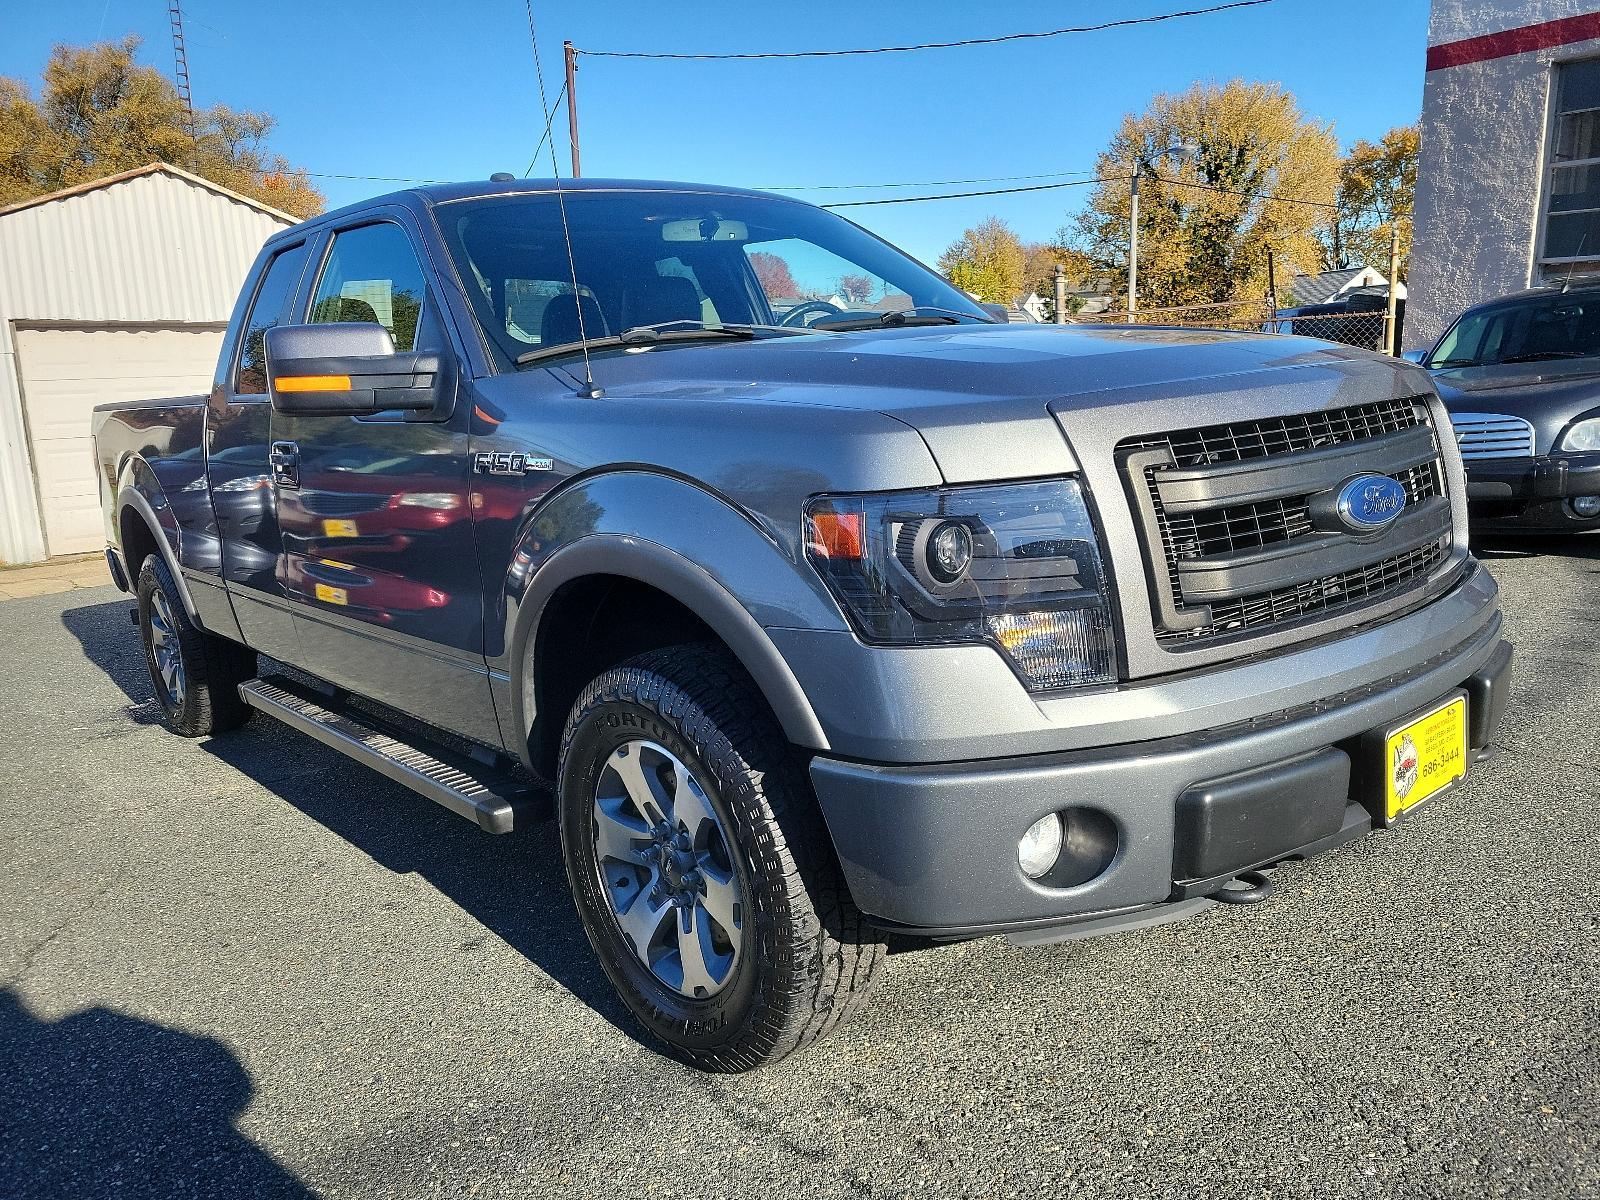 Aero Motors Used Cars For Sale Essex MD - 2013 Ford F-150